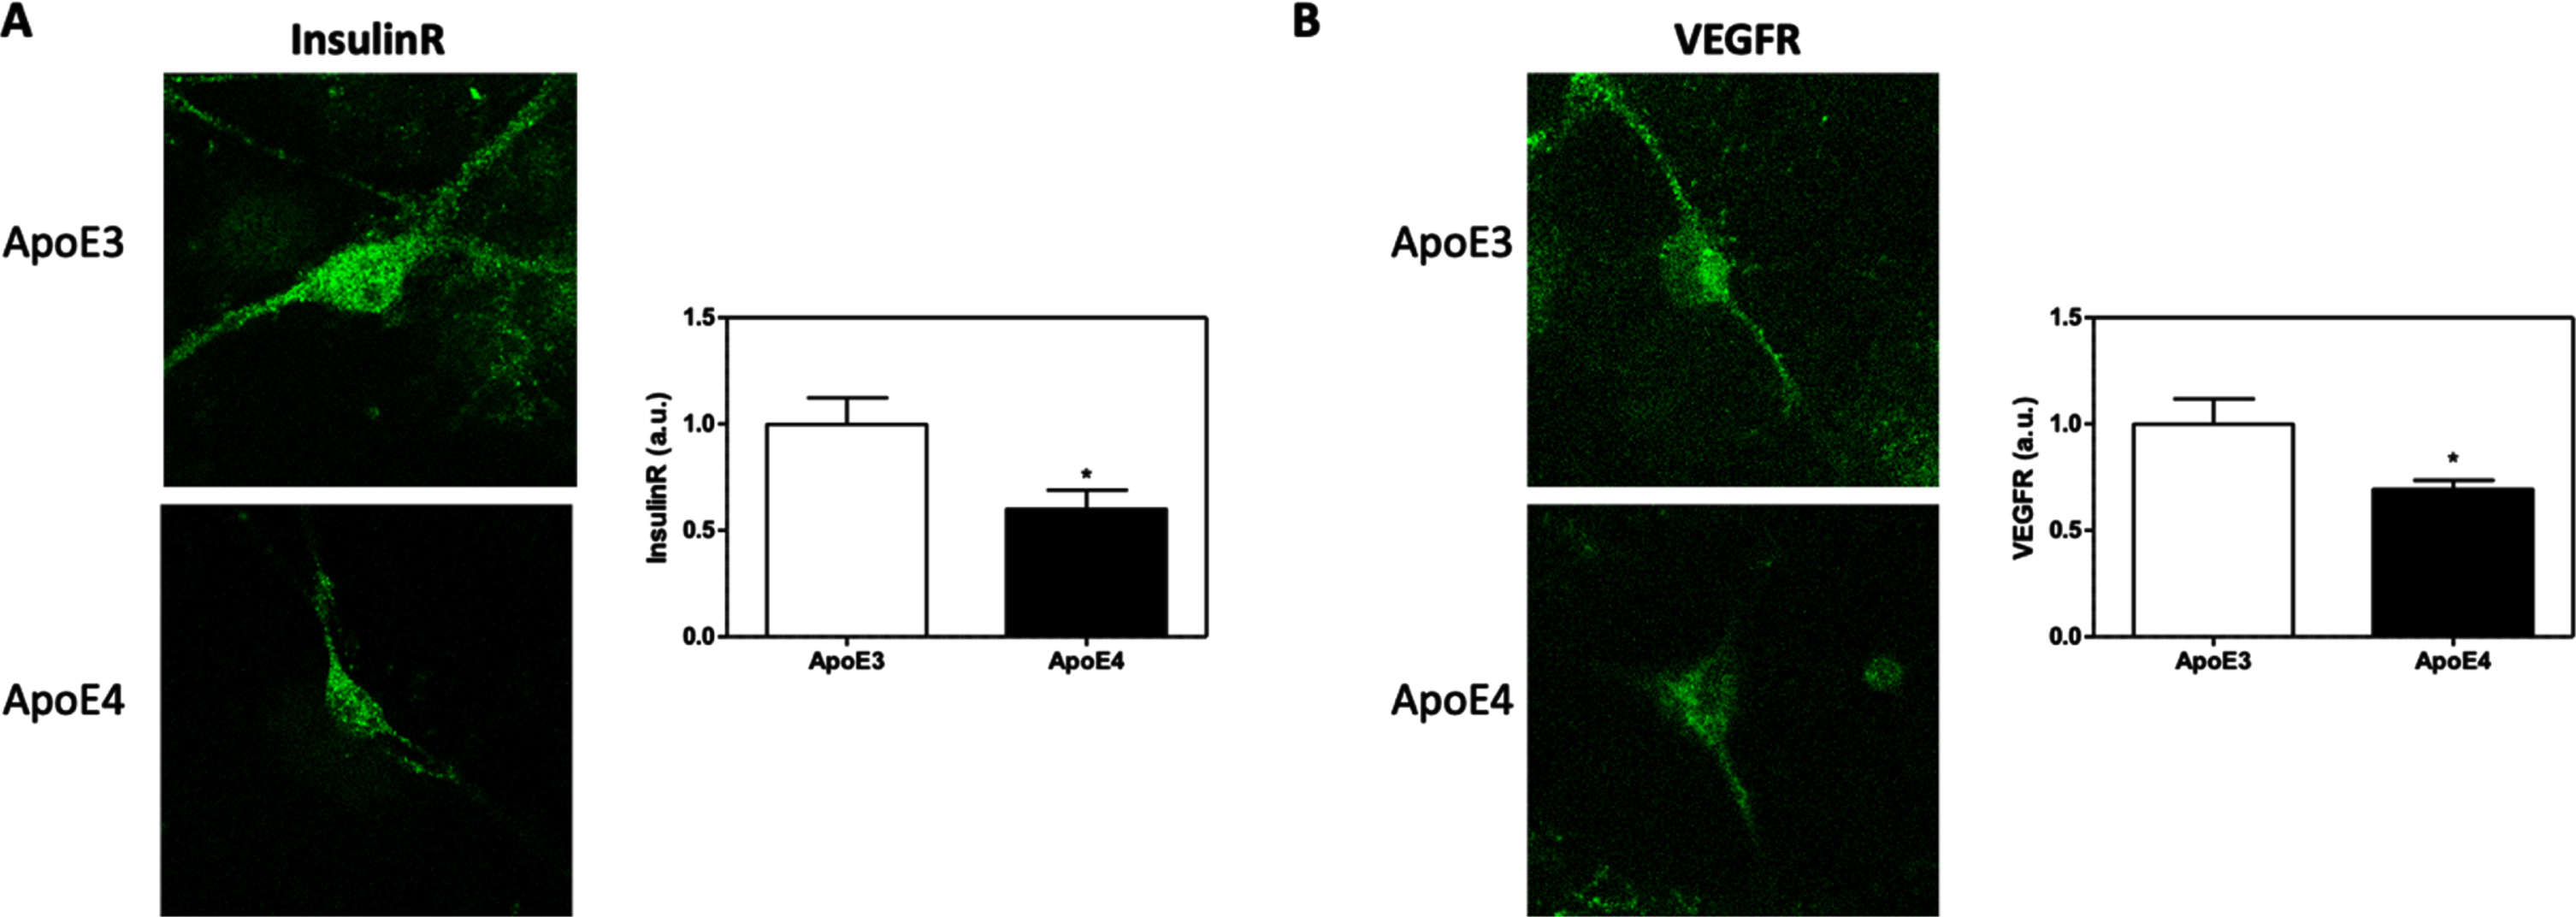 The effects of APOE genotype on the total levels of IR and VEGFR. APOE3 and APOE4 primary neurons were stained for IR (A) and VEGFR (B). Representative images are shown on the left, whereas quantifications of the results are shown on the right. The results show that both IR (APOE3 = 1.00±0.12, APOE4 = 0.59±0.08, p < 0.05, N = 48–68 cells from 4 different preparations), and VEGFR (APOE3 = 1.00±0.11, APOE4 = 0.69±0.04, p < 0.05, N = 41–46 cells from 4 different preparations) are downregulated in APOE4 primary neurons. The scalebar on the images indicate 10μm. *p < 0.05.